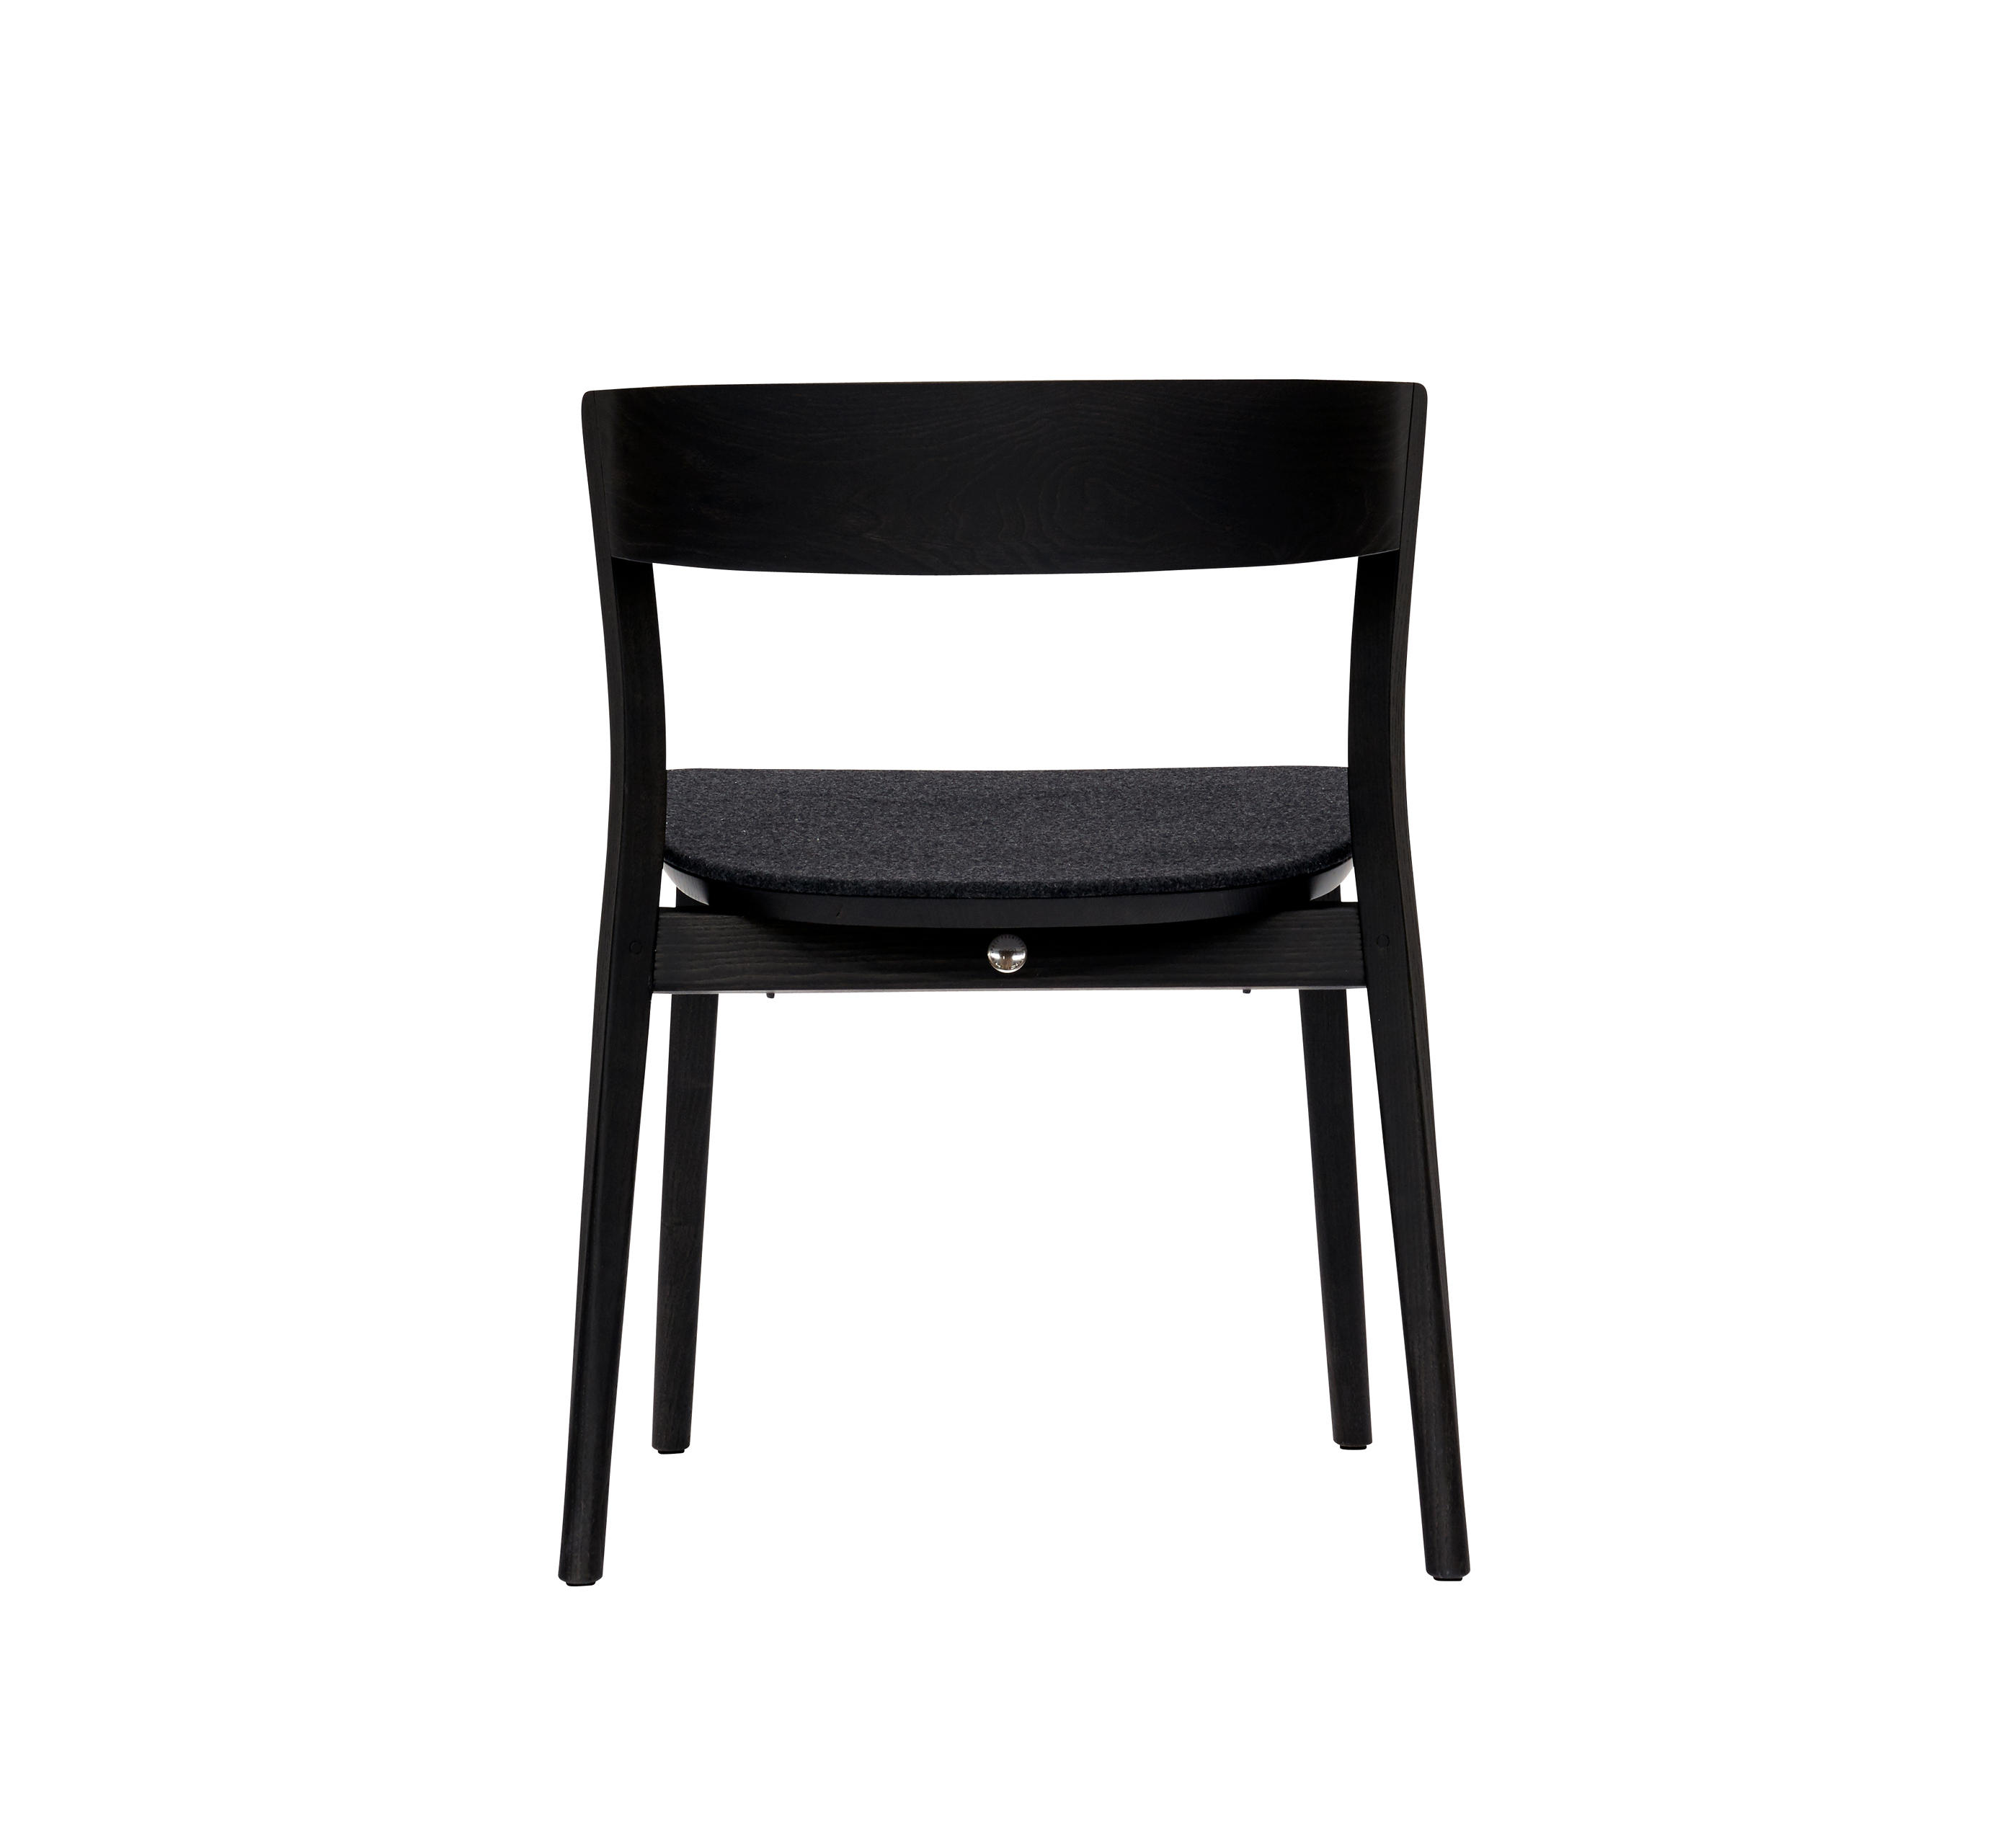 CLARKE CHAIR - Chairs from SP01 | Architonic